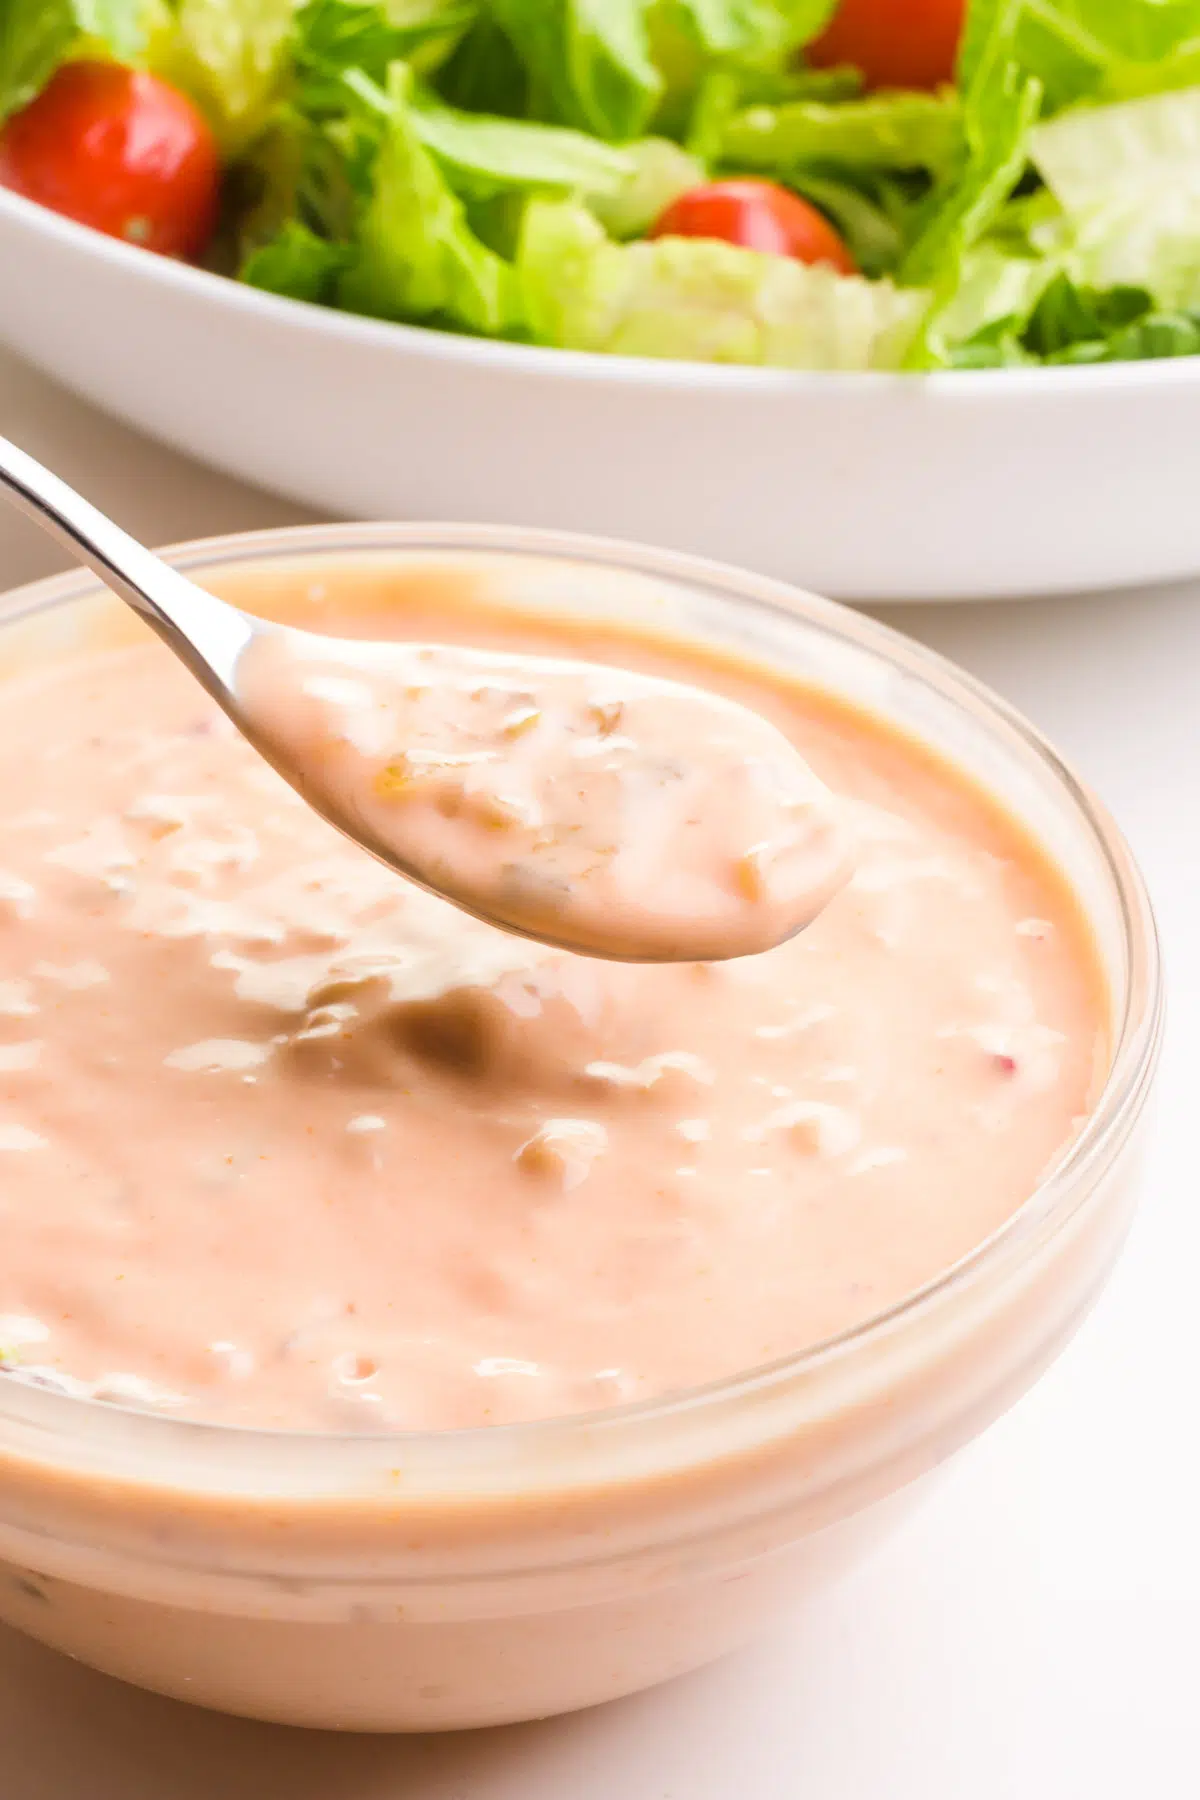 A spoon holds dressing and hovers over a bowl full of the the same creamy dressing. There's a bowl with salad in the background.